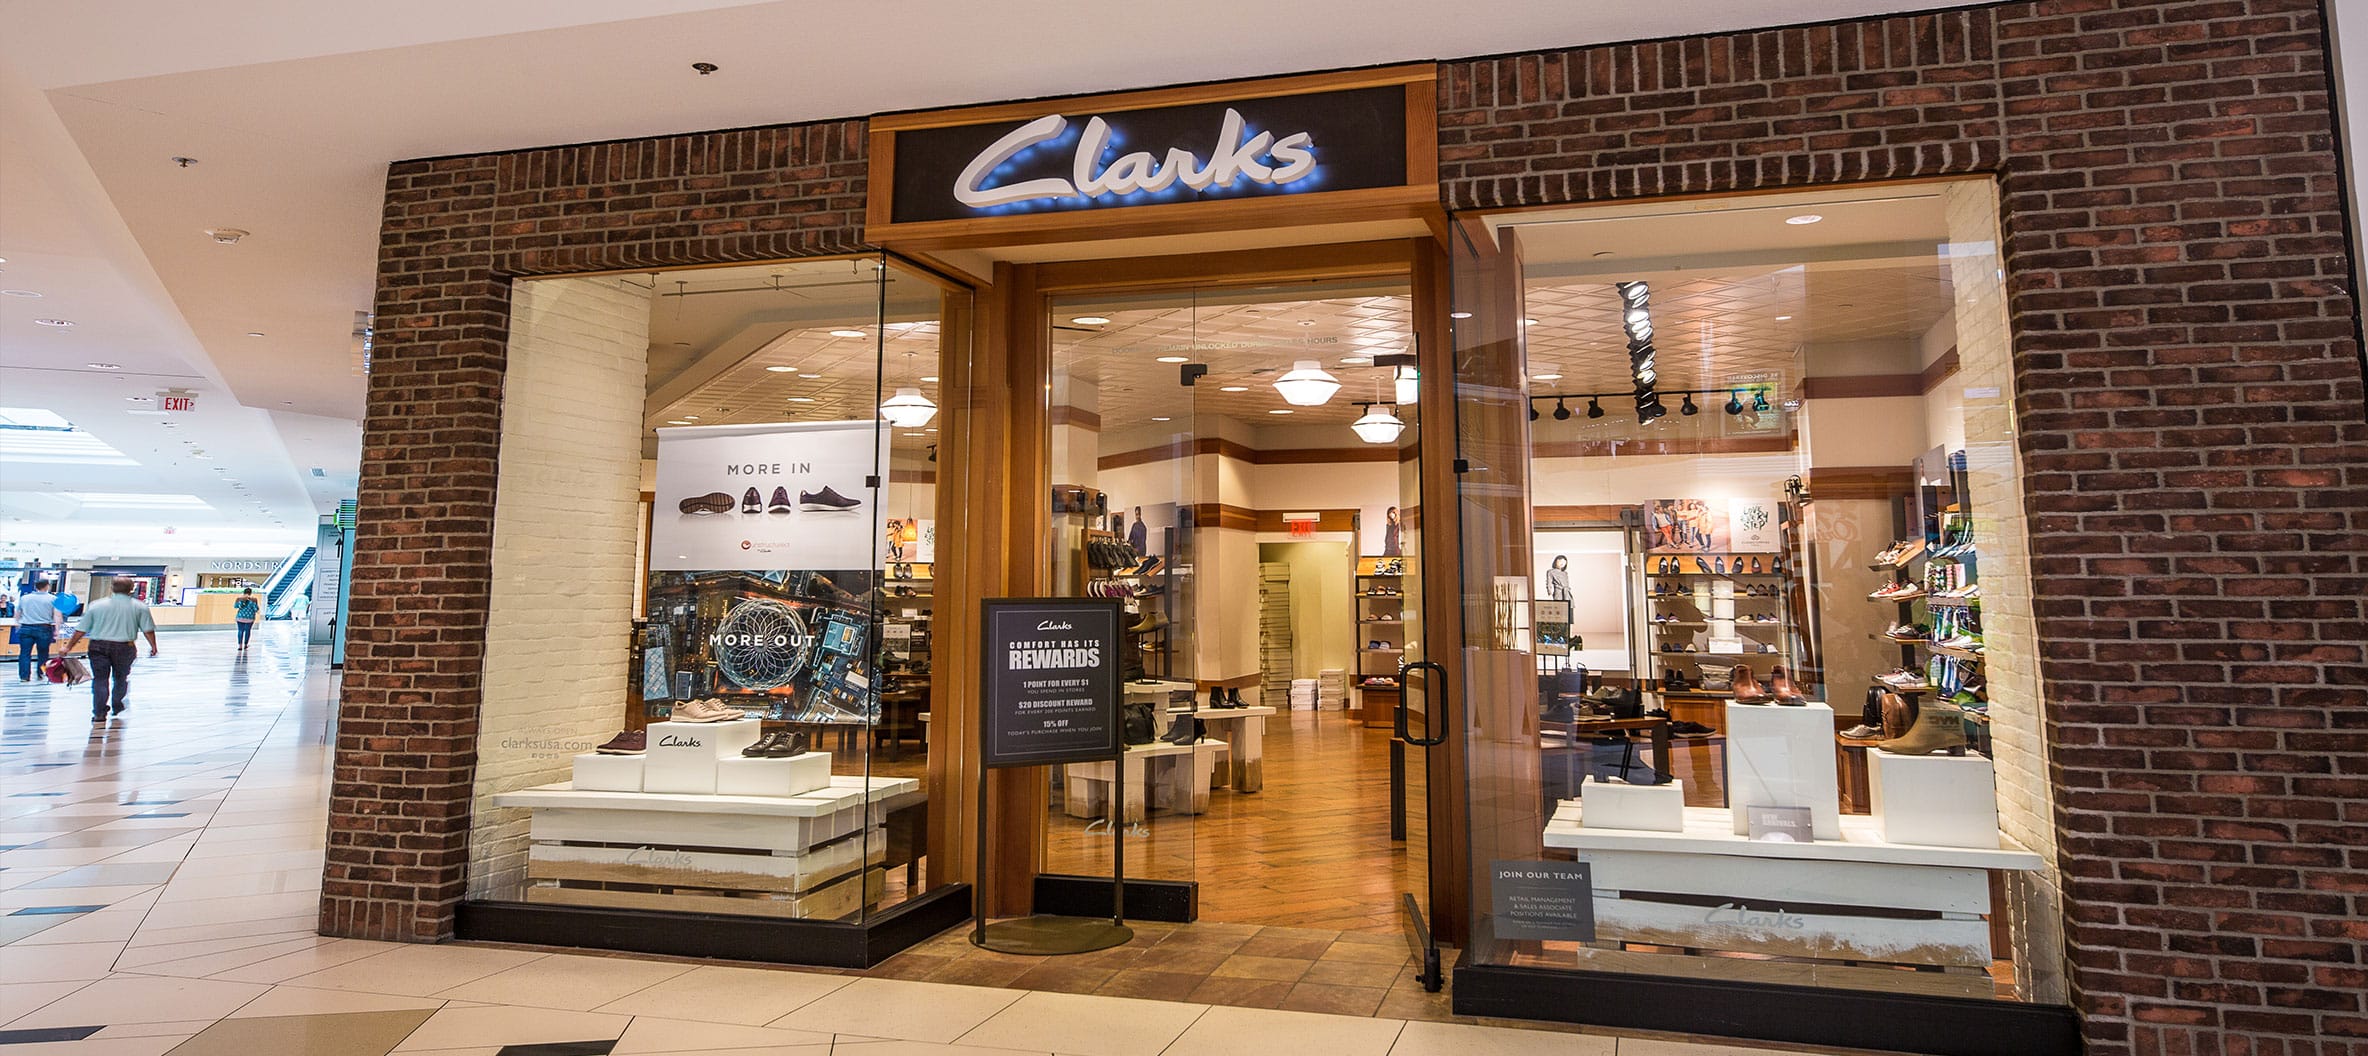 clarks main place mall off 64% - online 